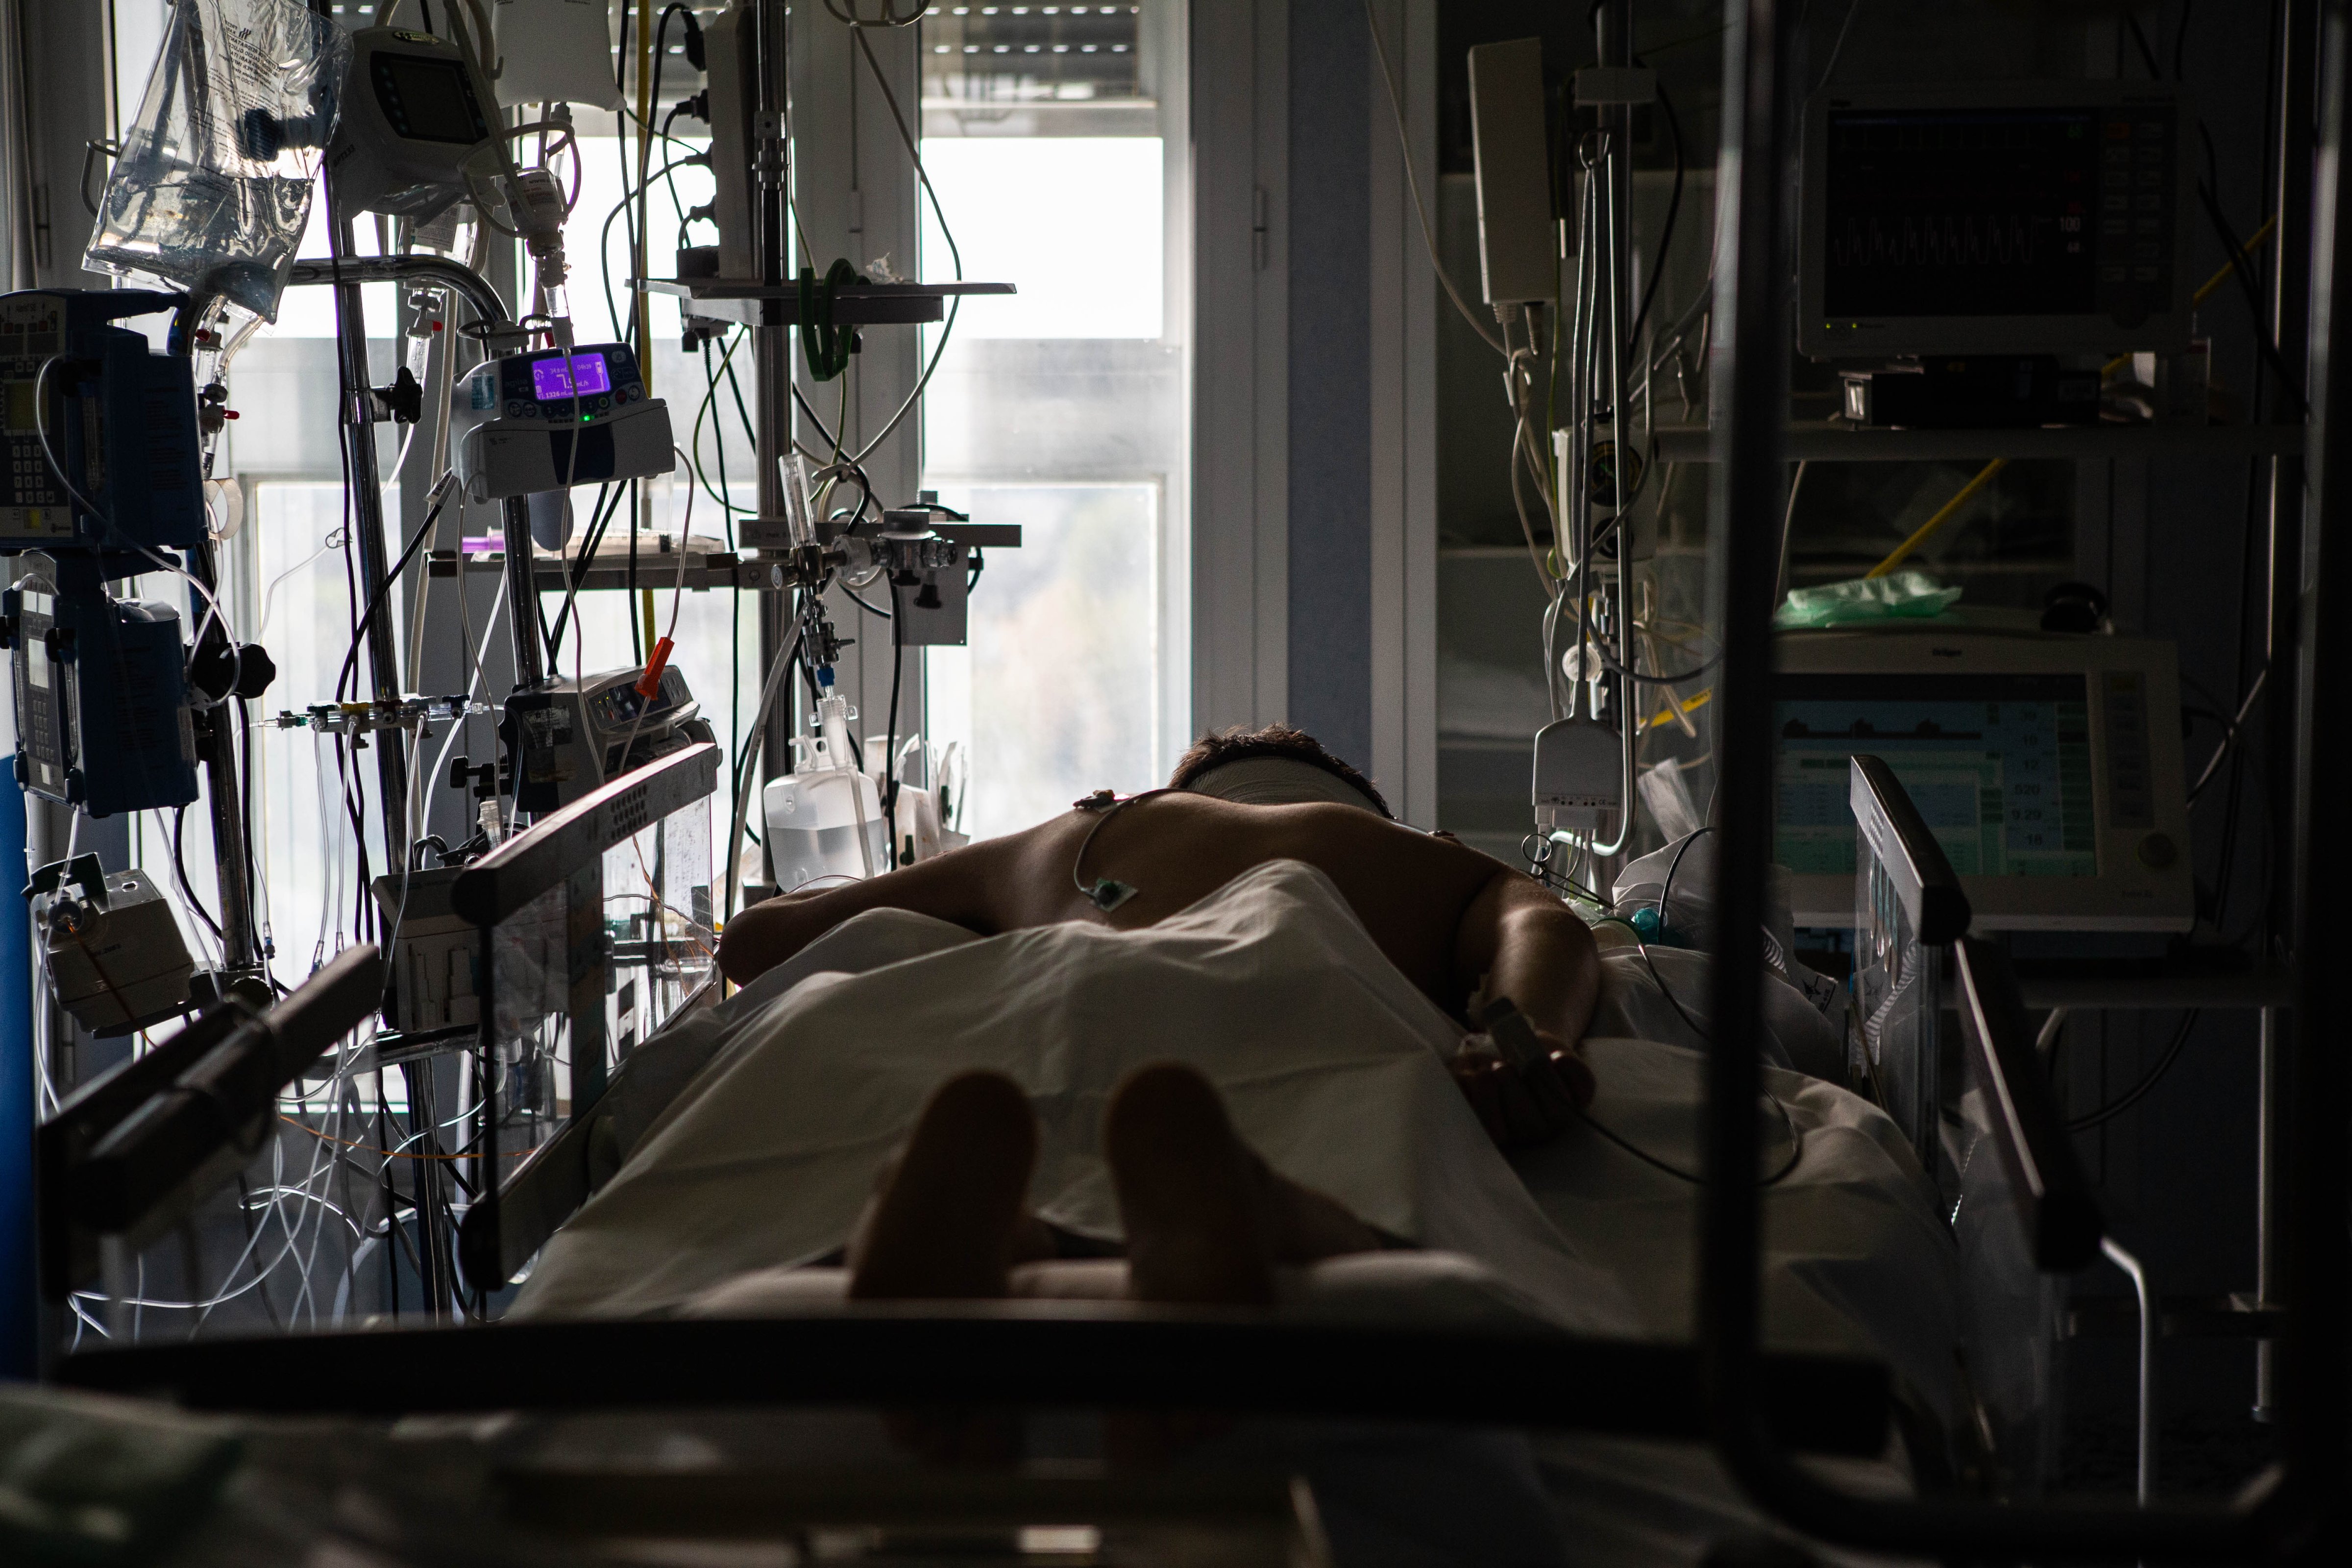 A patient lies in the intensive care unit at the Cremona Hospital in Northern Italy. (Arianna Pagani)